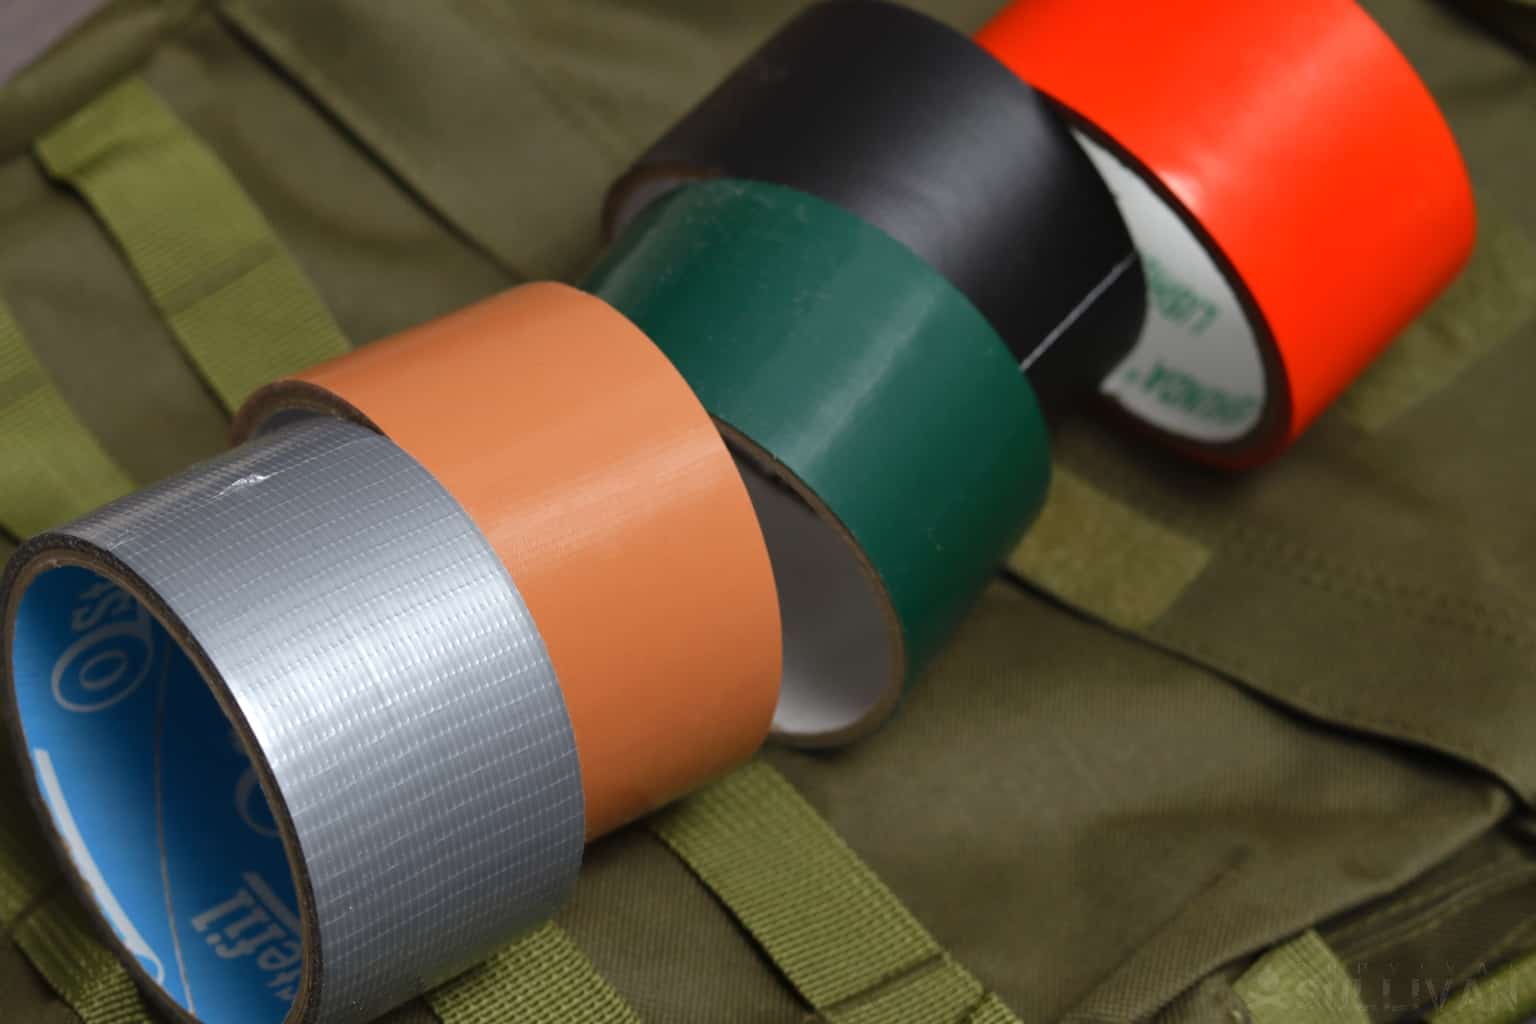 five rolls of colored duct tape: gray, brown, green, black, red